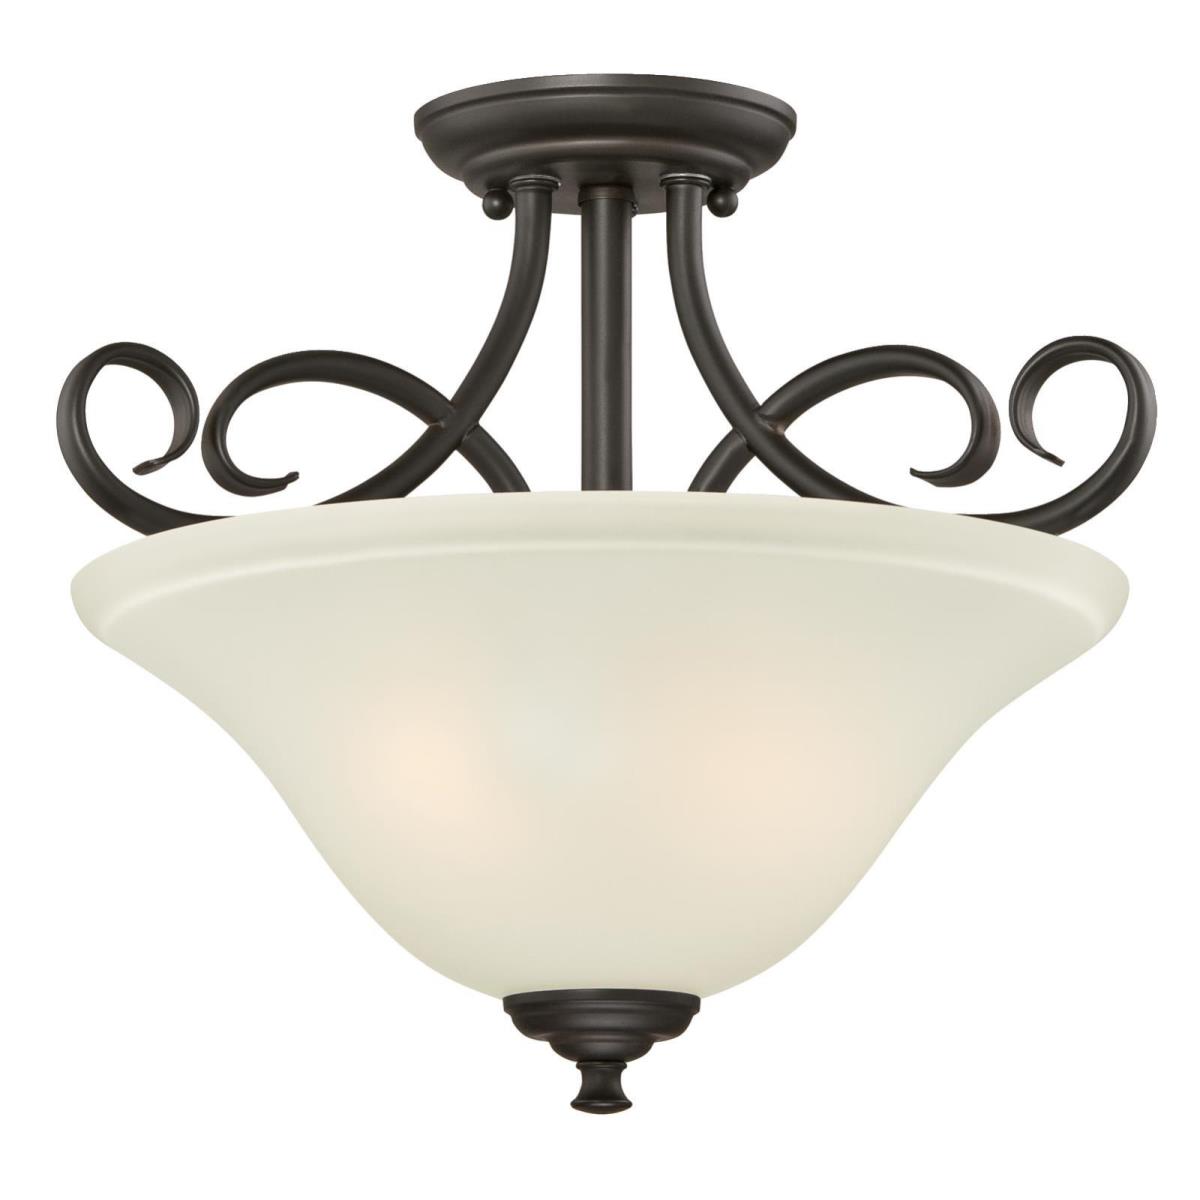 2 Light Semi-Flush Oil Rubbed Bronze Finish with Frosted Glass